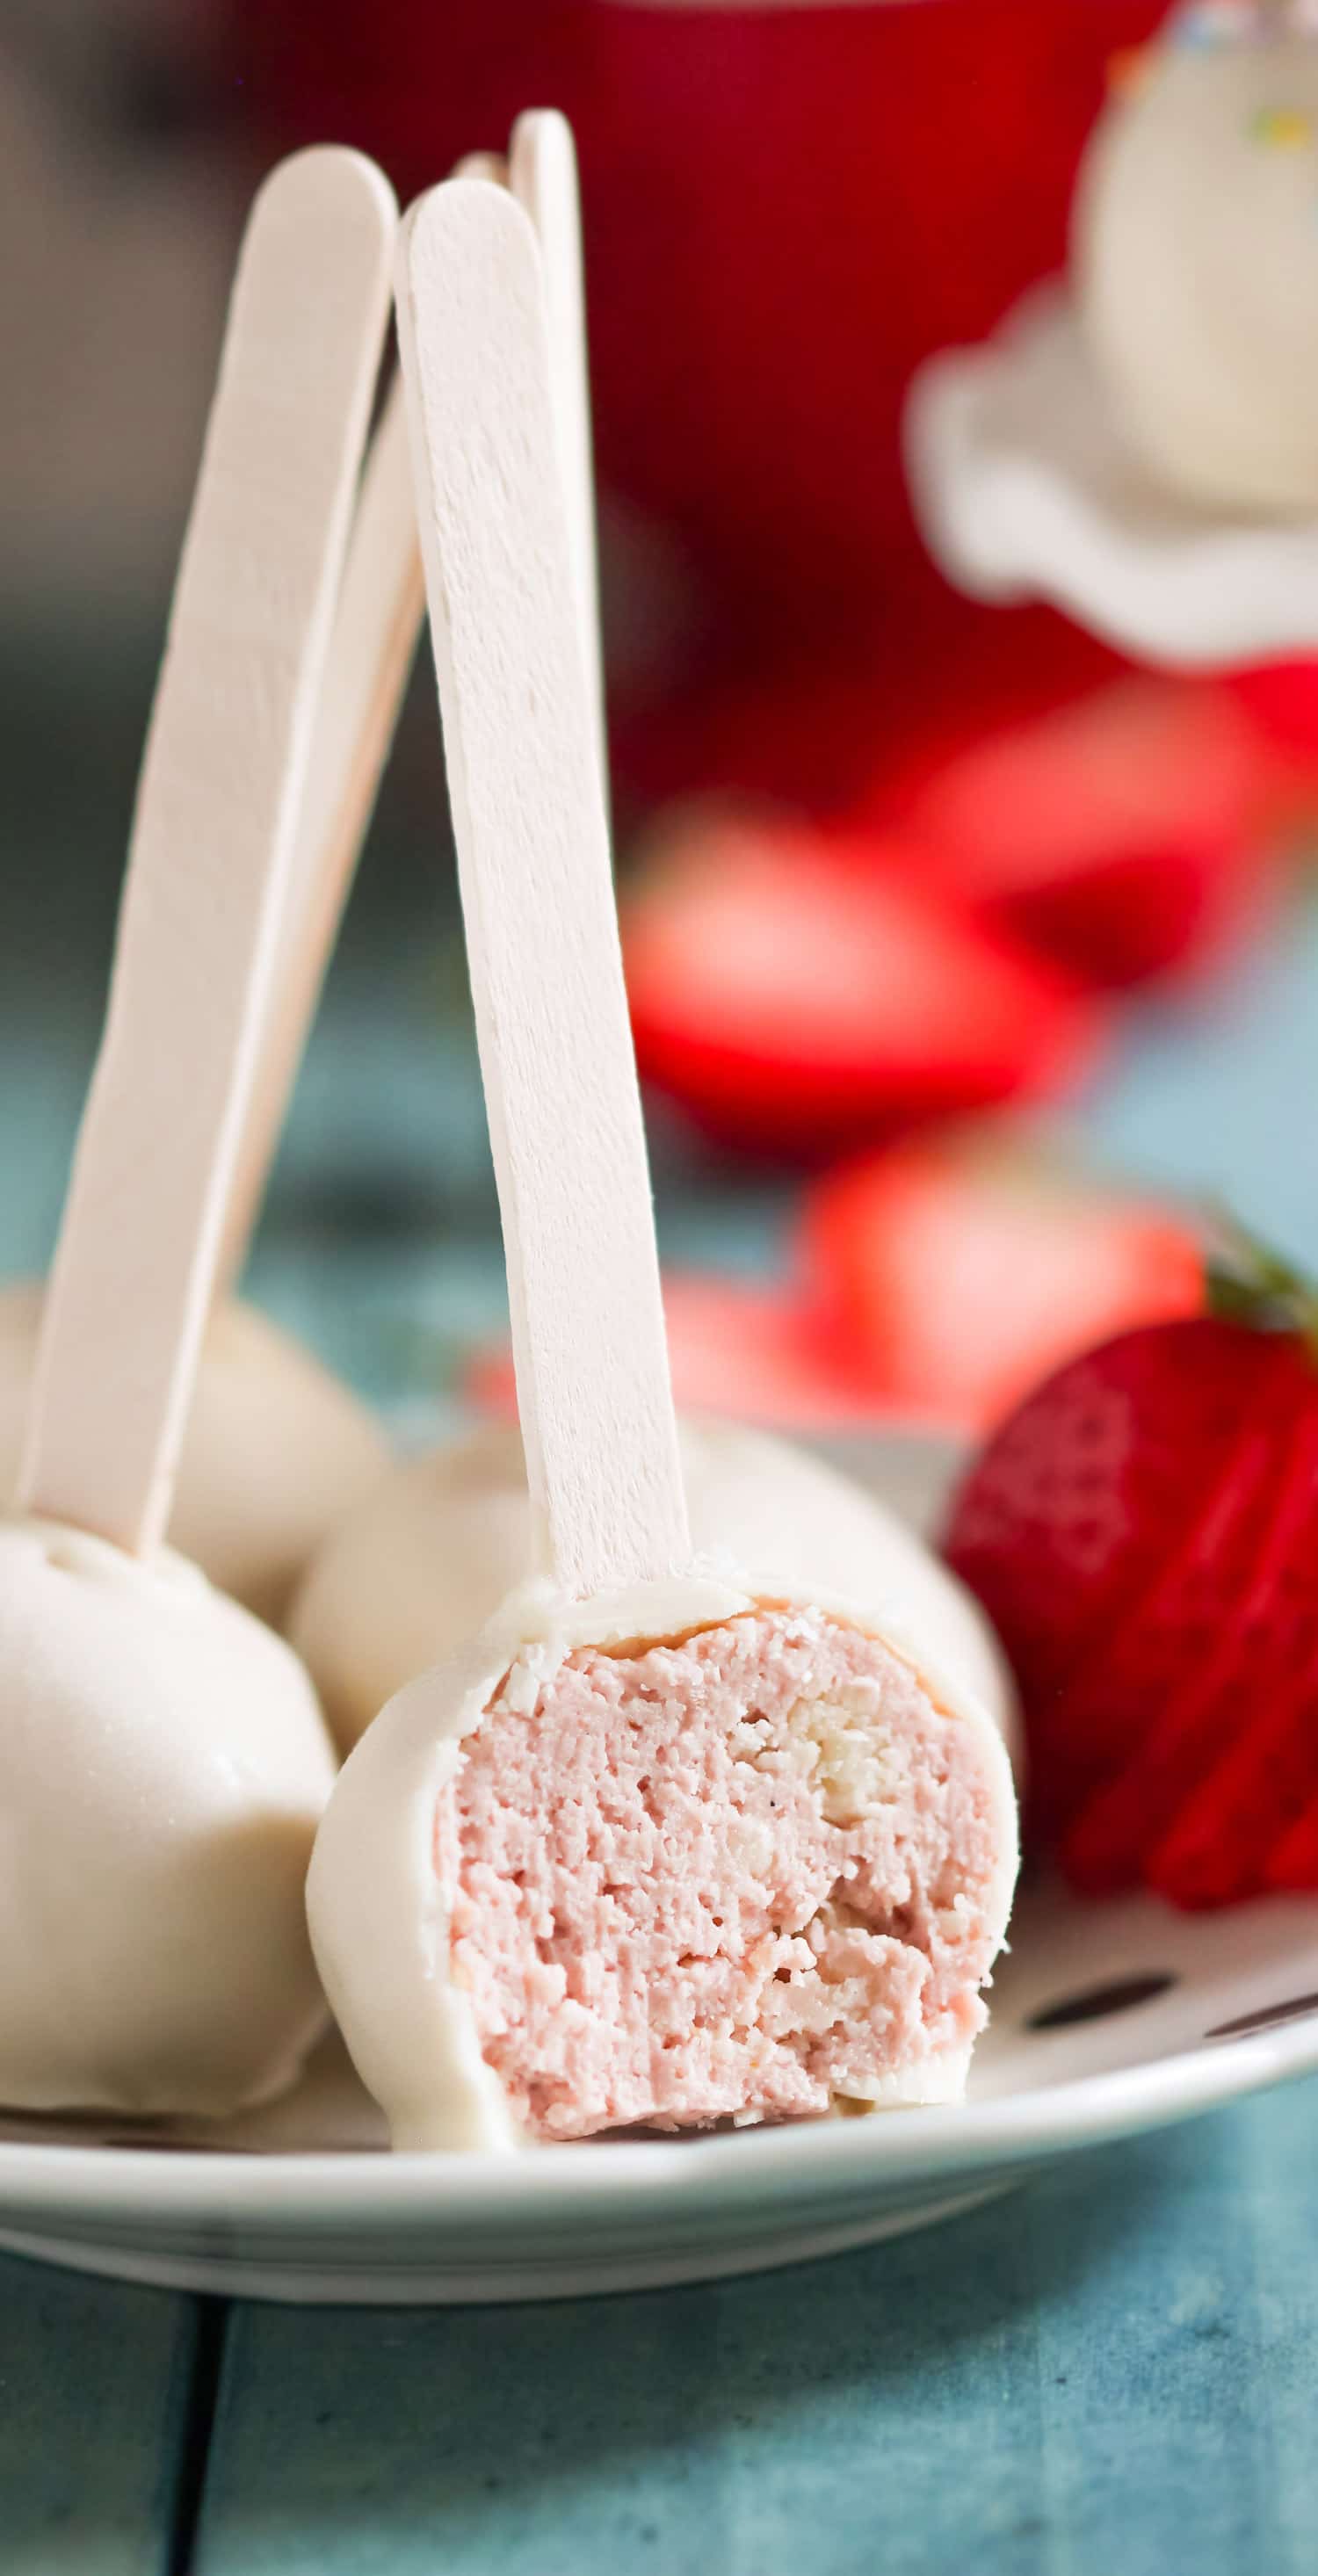 These Gluten Free Strawberry Shortcake Cheesecake Truffles are made with real strawberry cheesecake and sugar cookies chunks, and are coated in rich and delicious white chocolate.  If you're looking for a guilt-free bite-sized treat, you've found it! Healthy Dessert Recipes at the Desserts With Benefits Blog